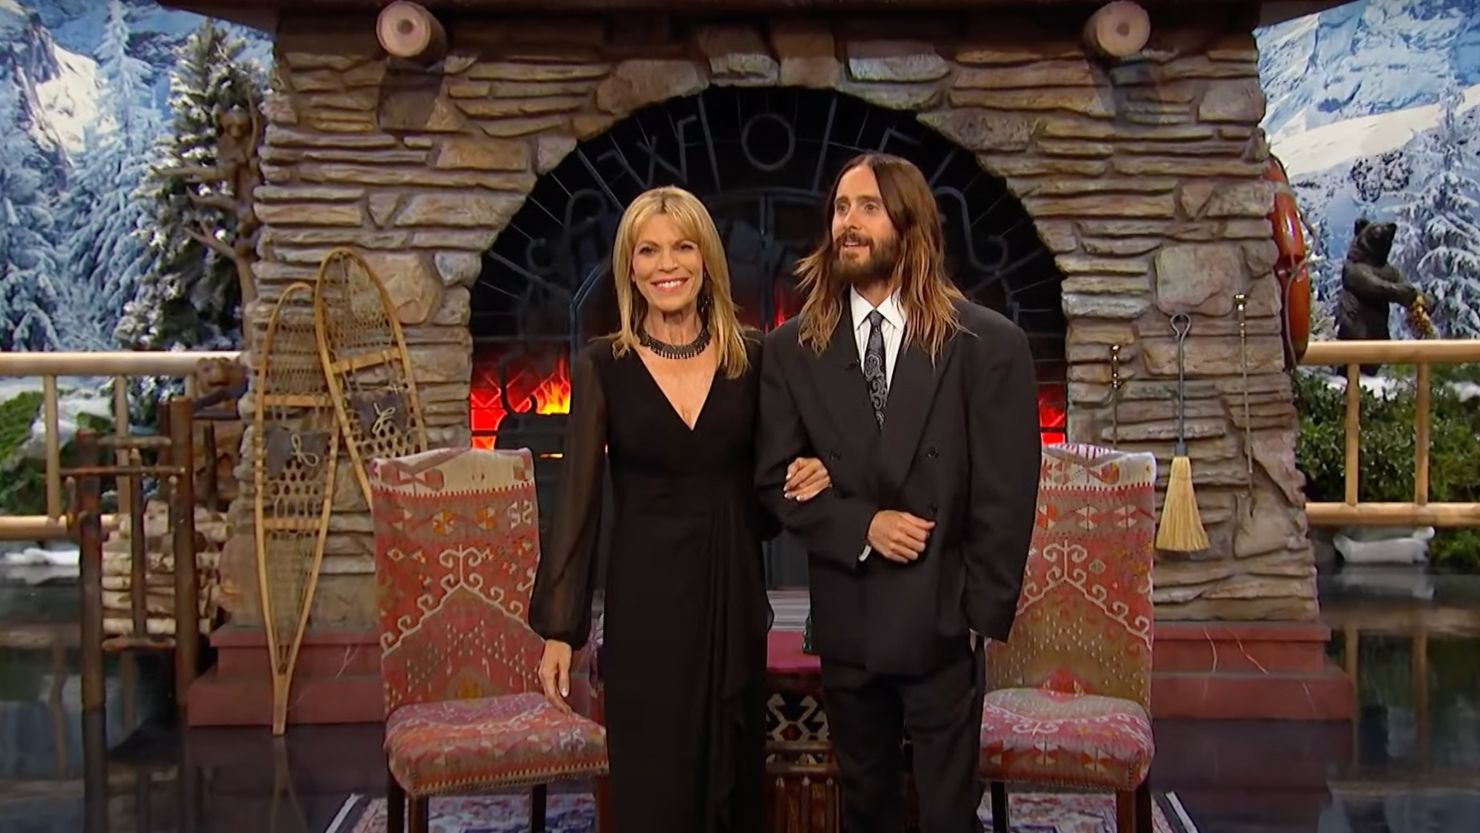 Jared Leto makes a surprise appearance on "Wheel of Fortune" with Vanna White.